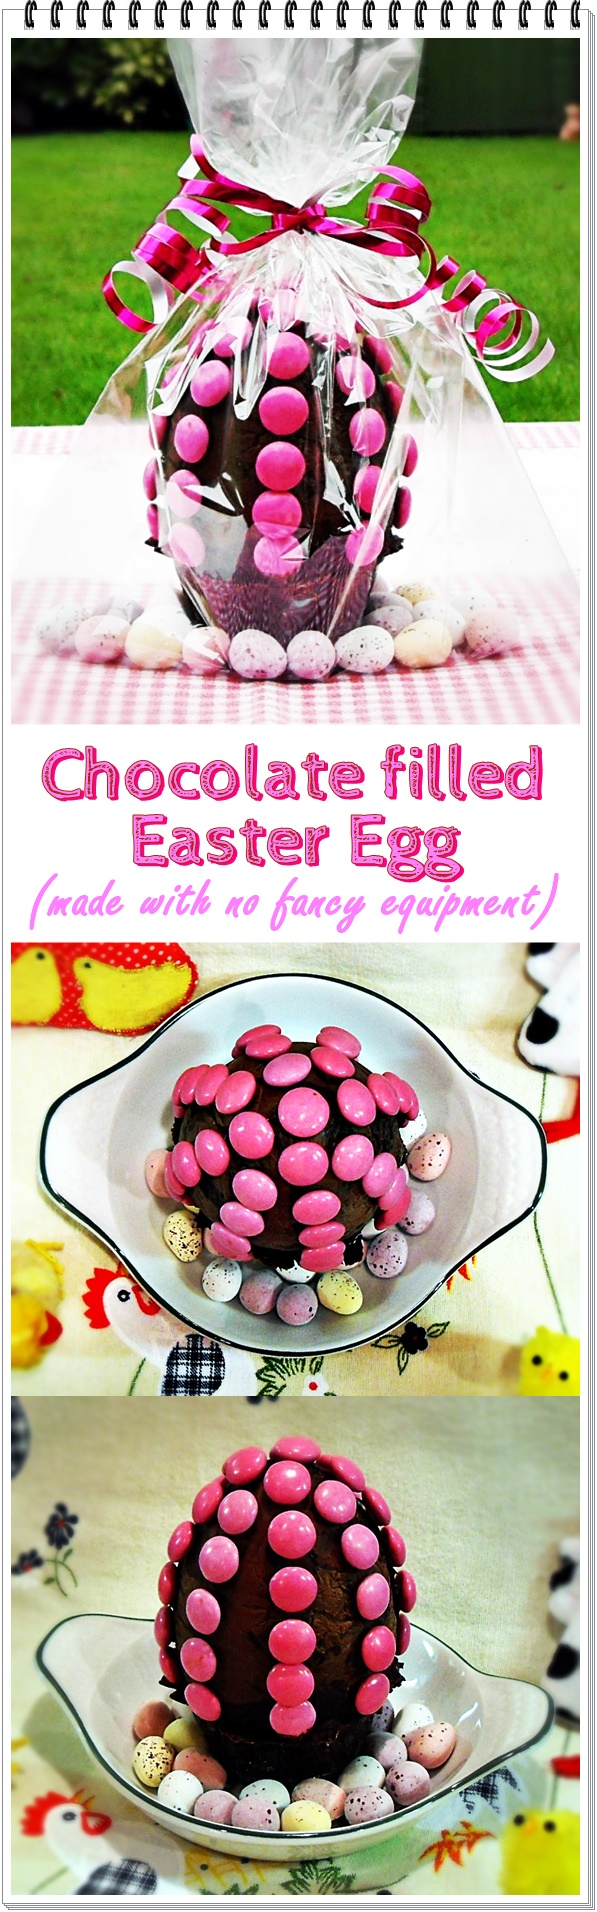 Chocolate filled Easter Egg (made with no fancy equipment) @fabfood4all